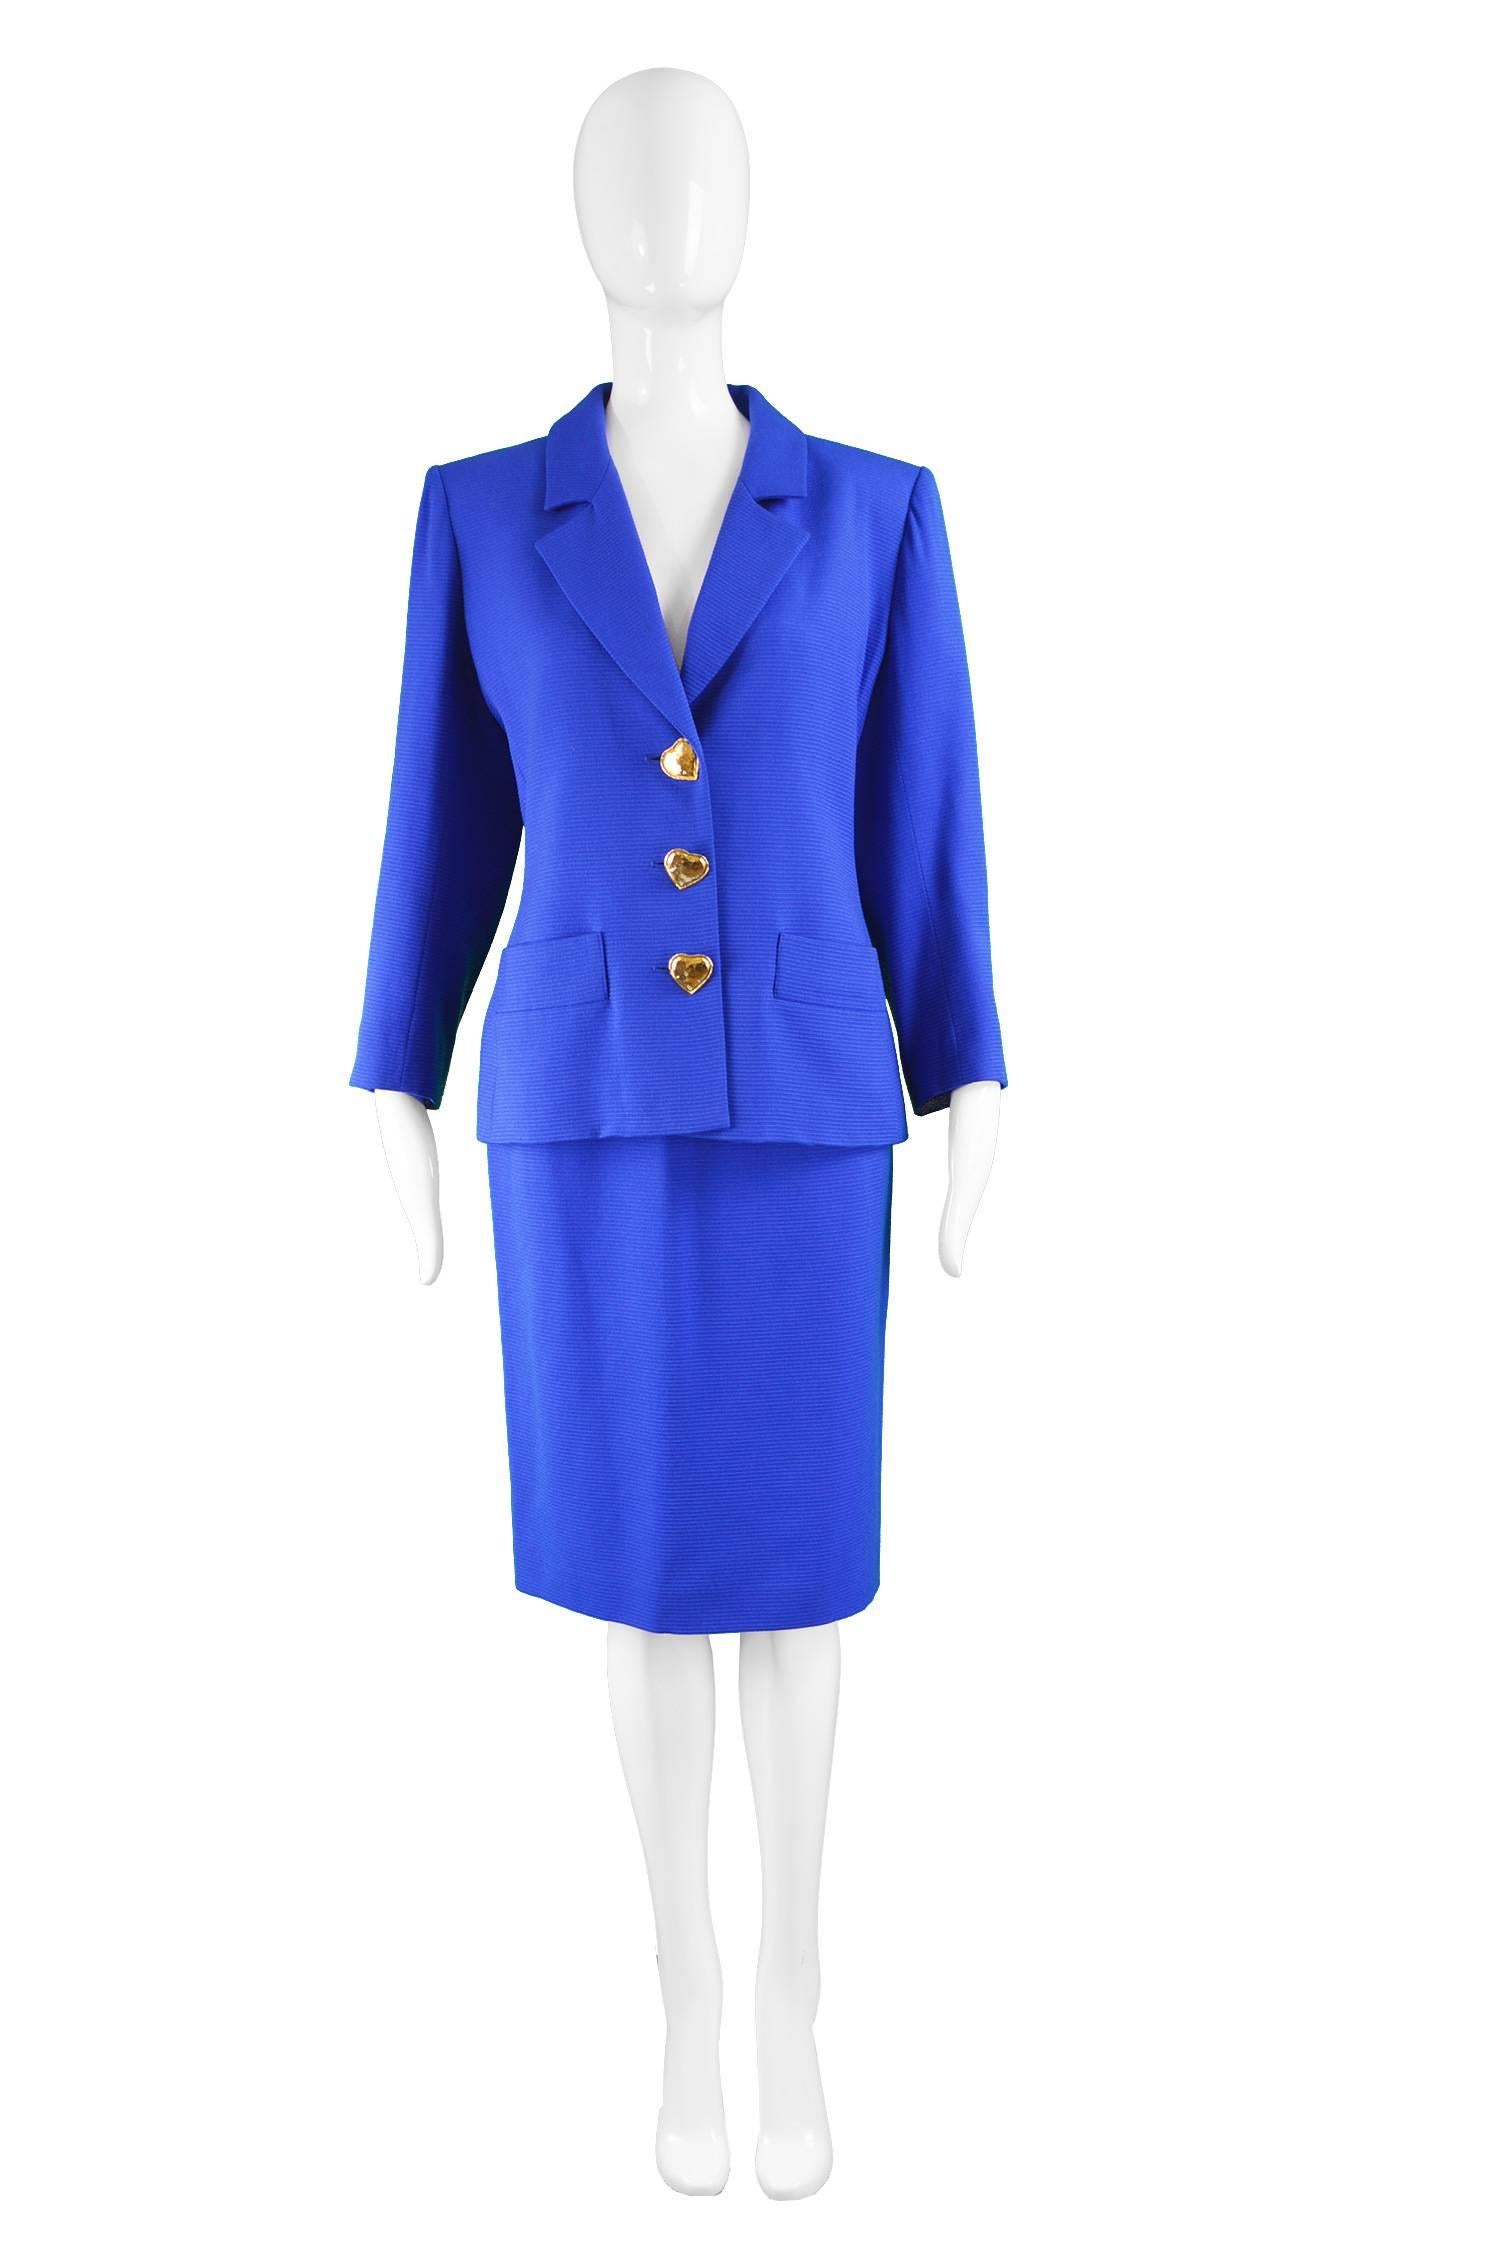 YSL Blue Wool Blazer & Skirt Suit with Heart Buttons, 1980s

Estimated Size: UK 12-14/ US 10-12/ EU 40-42. Please check measurements.
Jacket
Bust - 40” / 101cm (allow a couple of inches room for movement)
Waist - 36” / 91cm
Length (Shoulder to